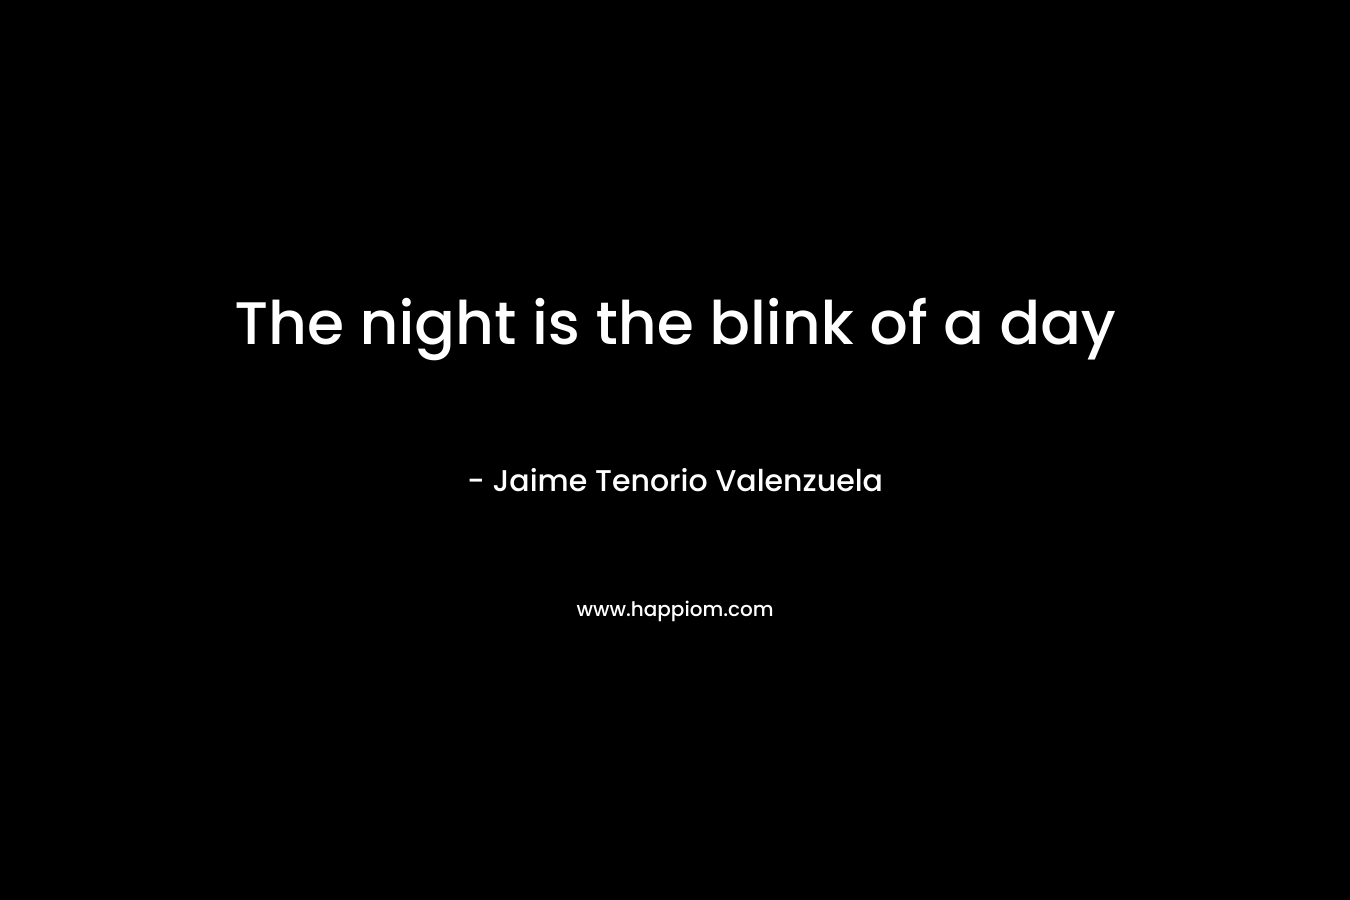 The night is the blink of a day